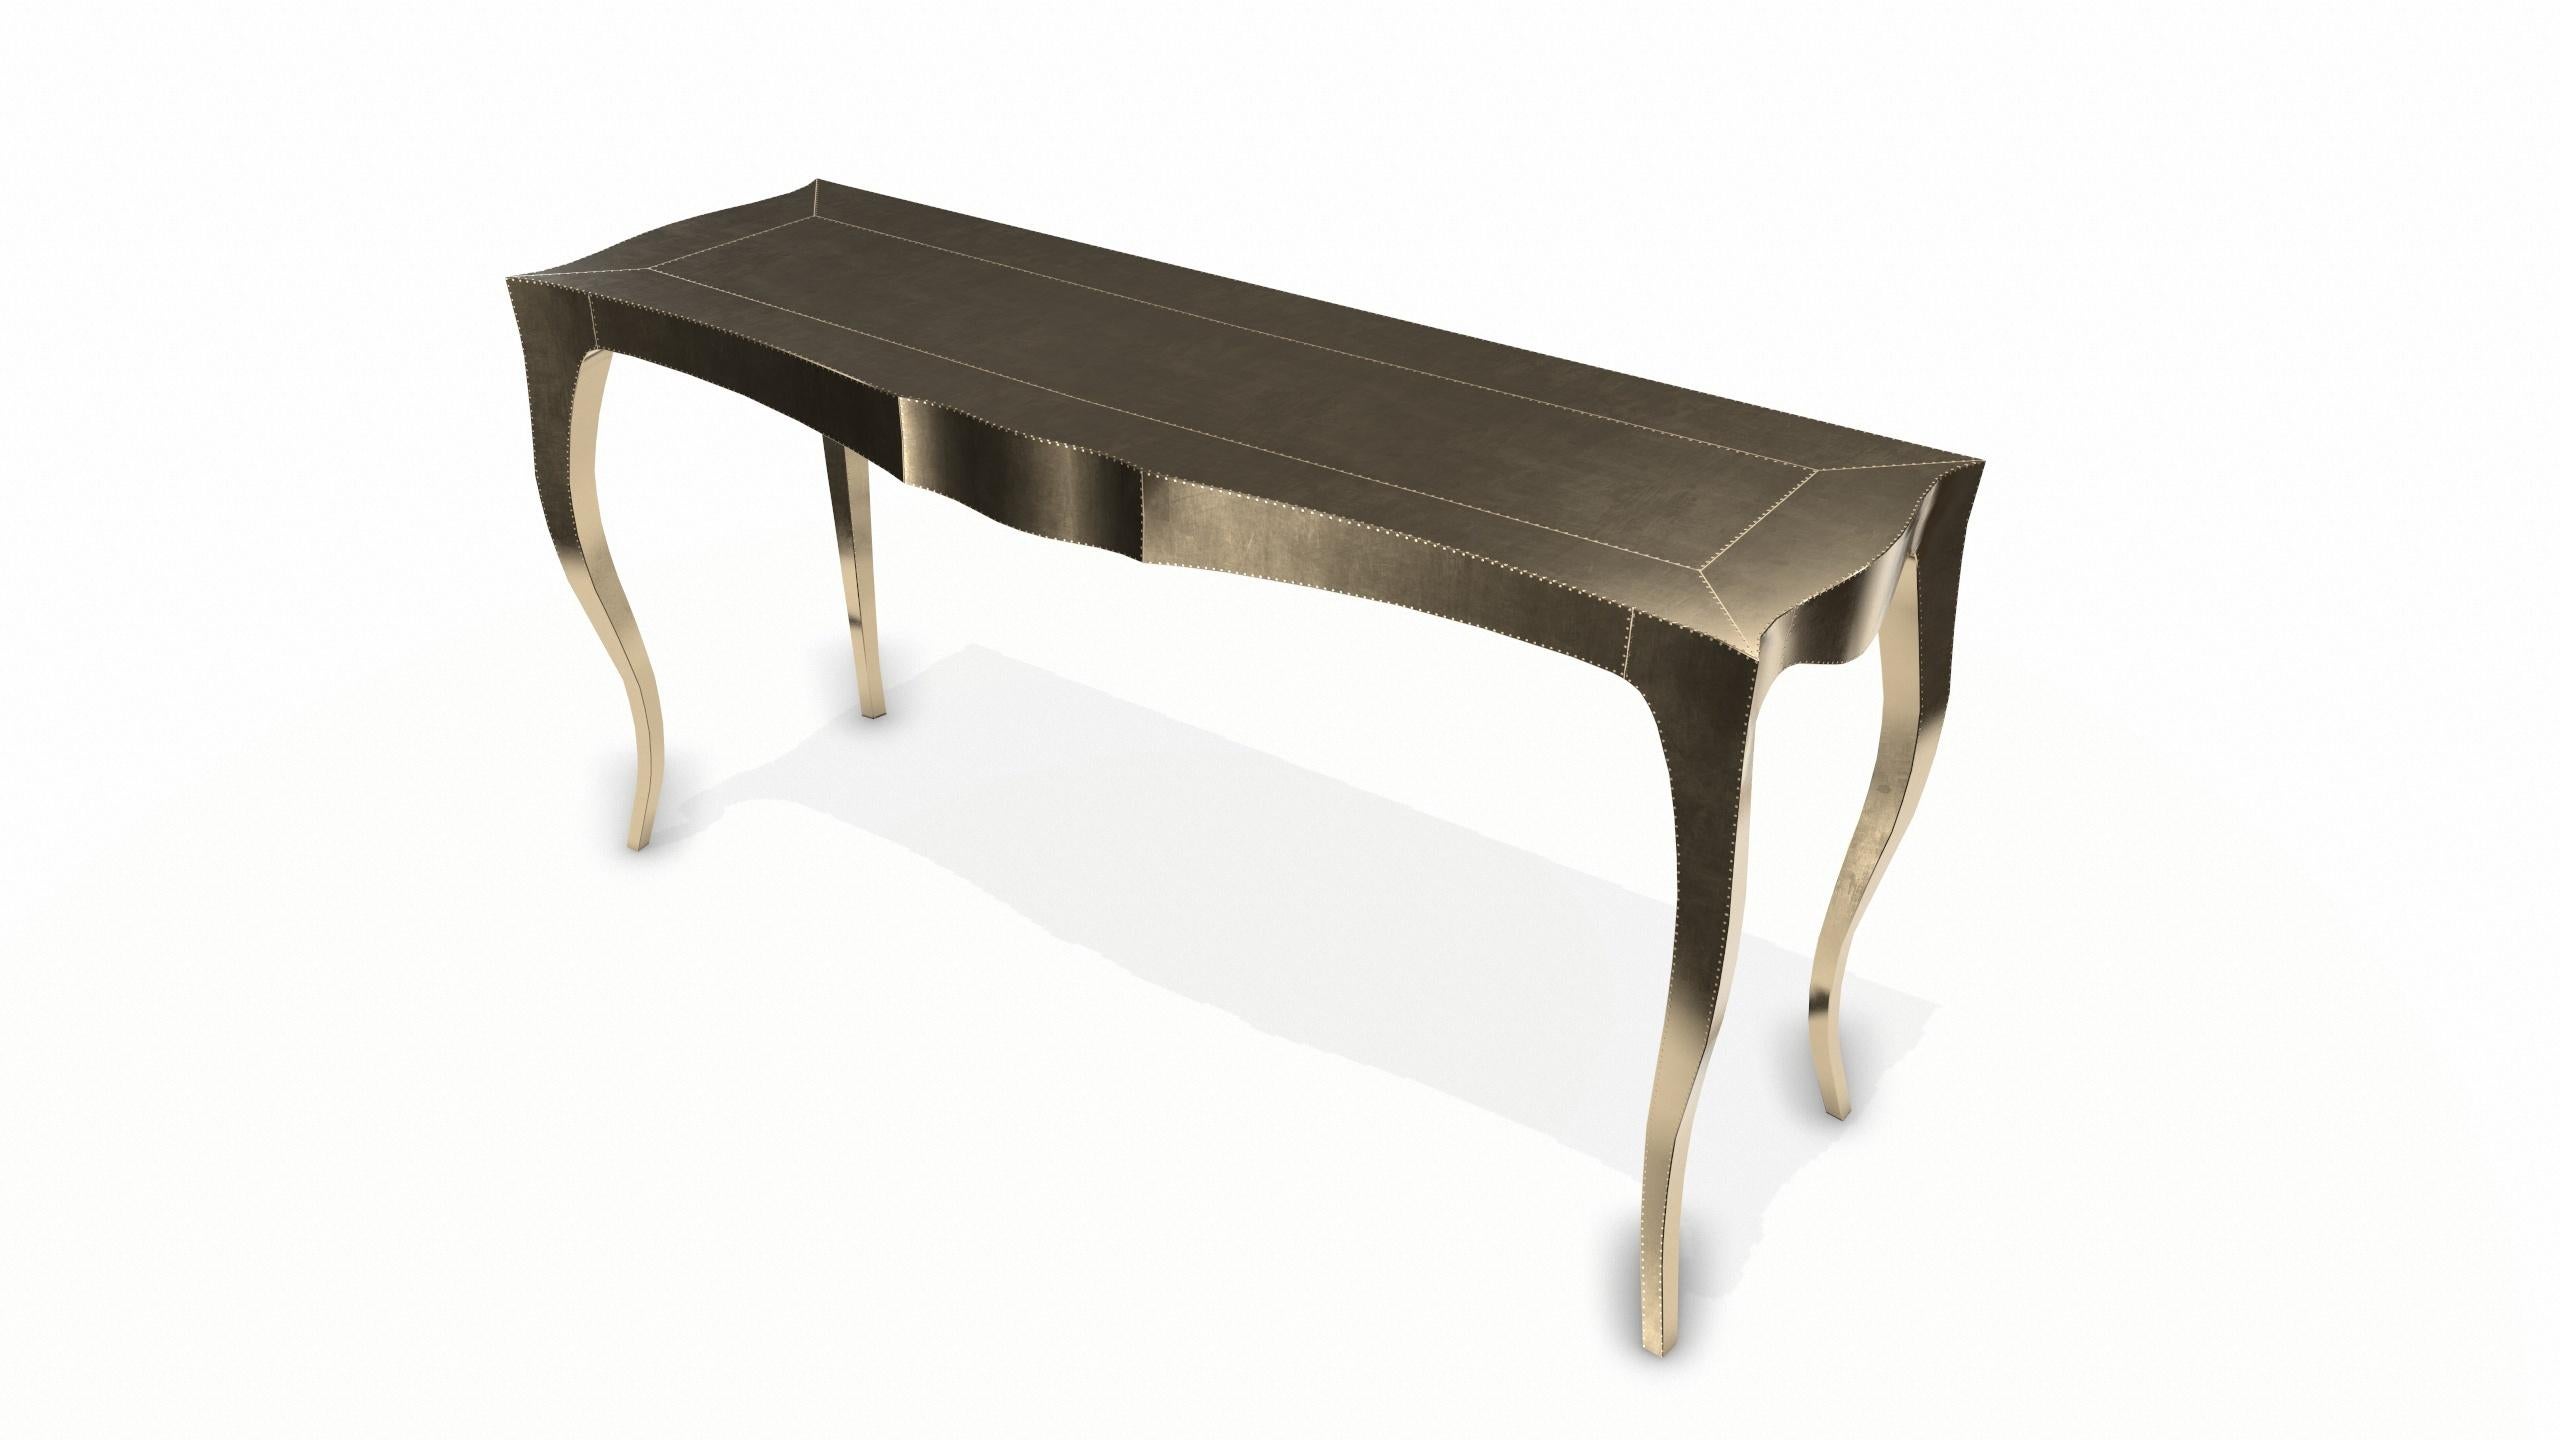 Other Louise Console Art Nouveau Tray Table Smooth Brass by Paul Mathieu  For Sale